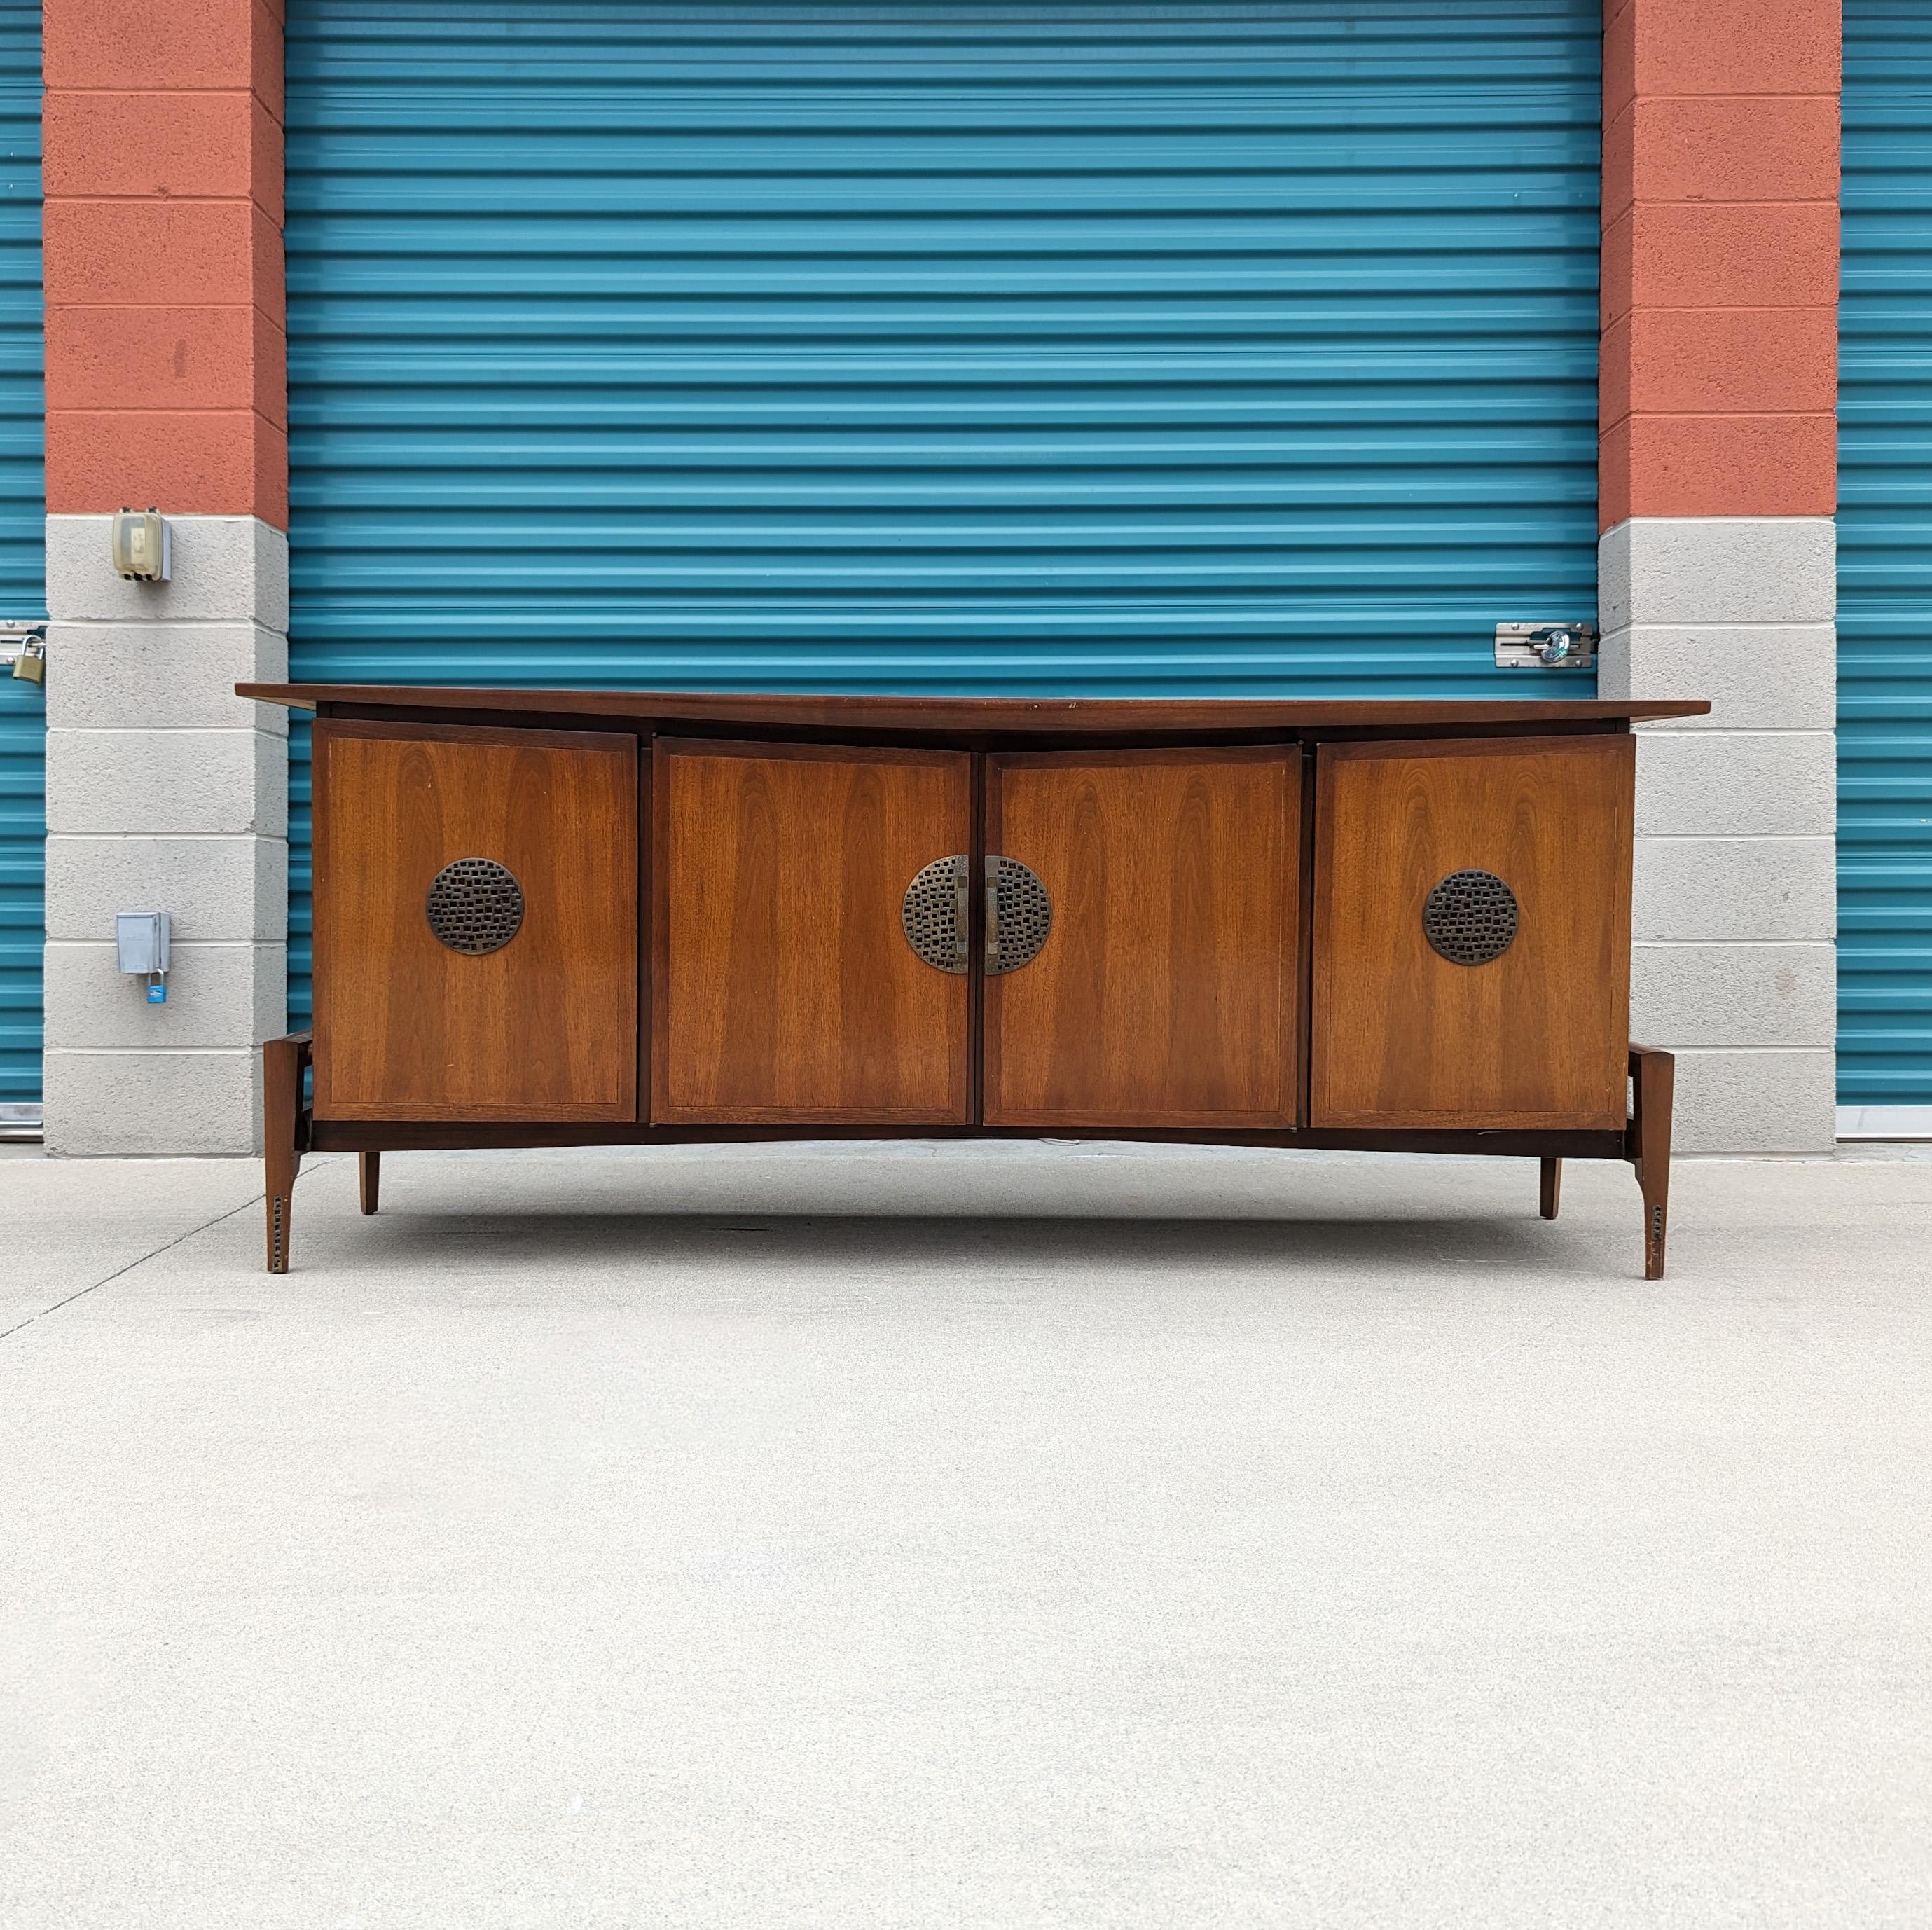 Just in, a walnut and bronze credenza by Helen Hobey for Baker, c1960s. This piece is in original condition and features a walnut finish with a skeletal base making it almost seem like it's suspended in air. Four doors total that open up to expose